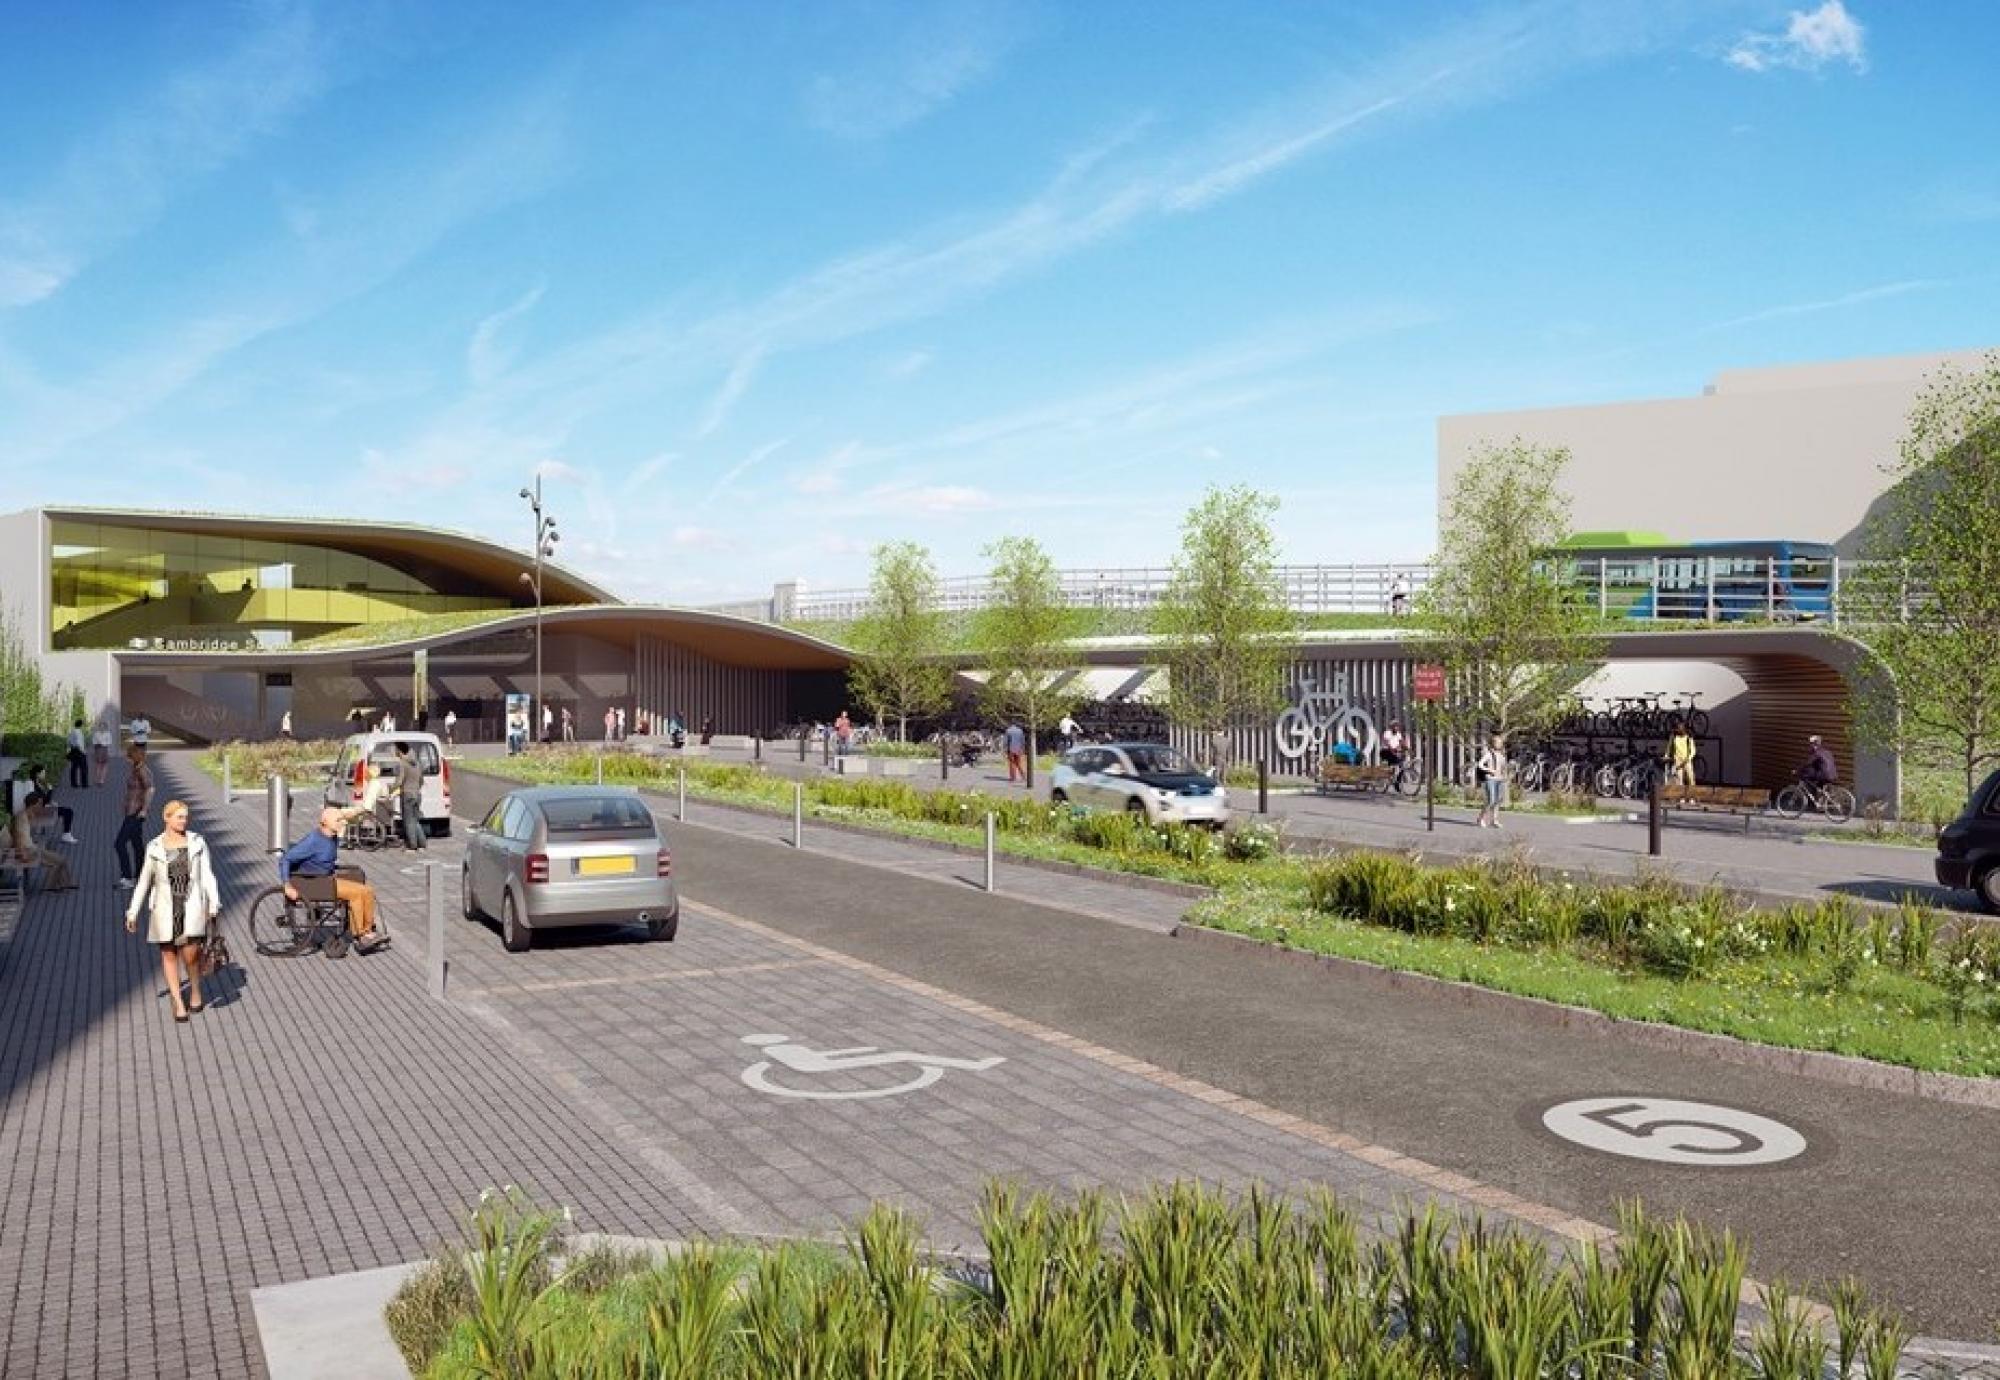 Second round of public consultation on Cambridge South station launches 